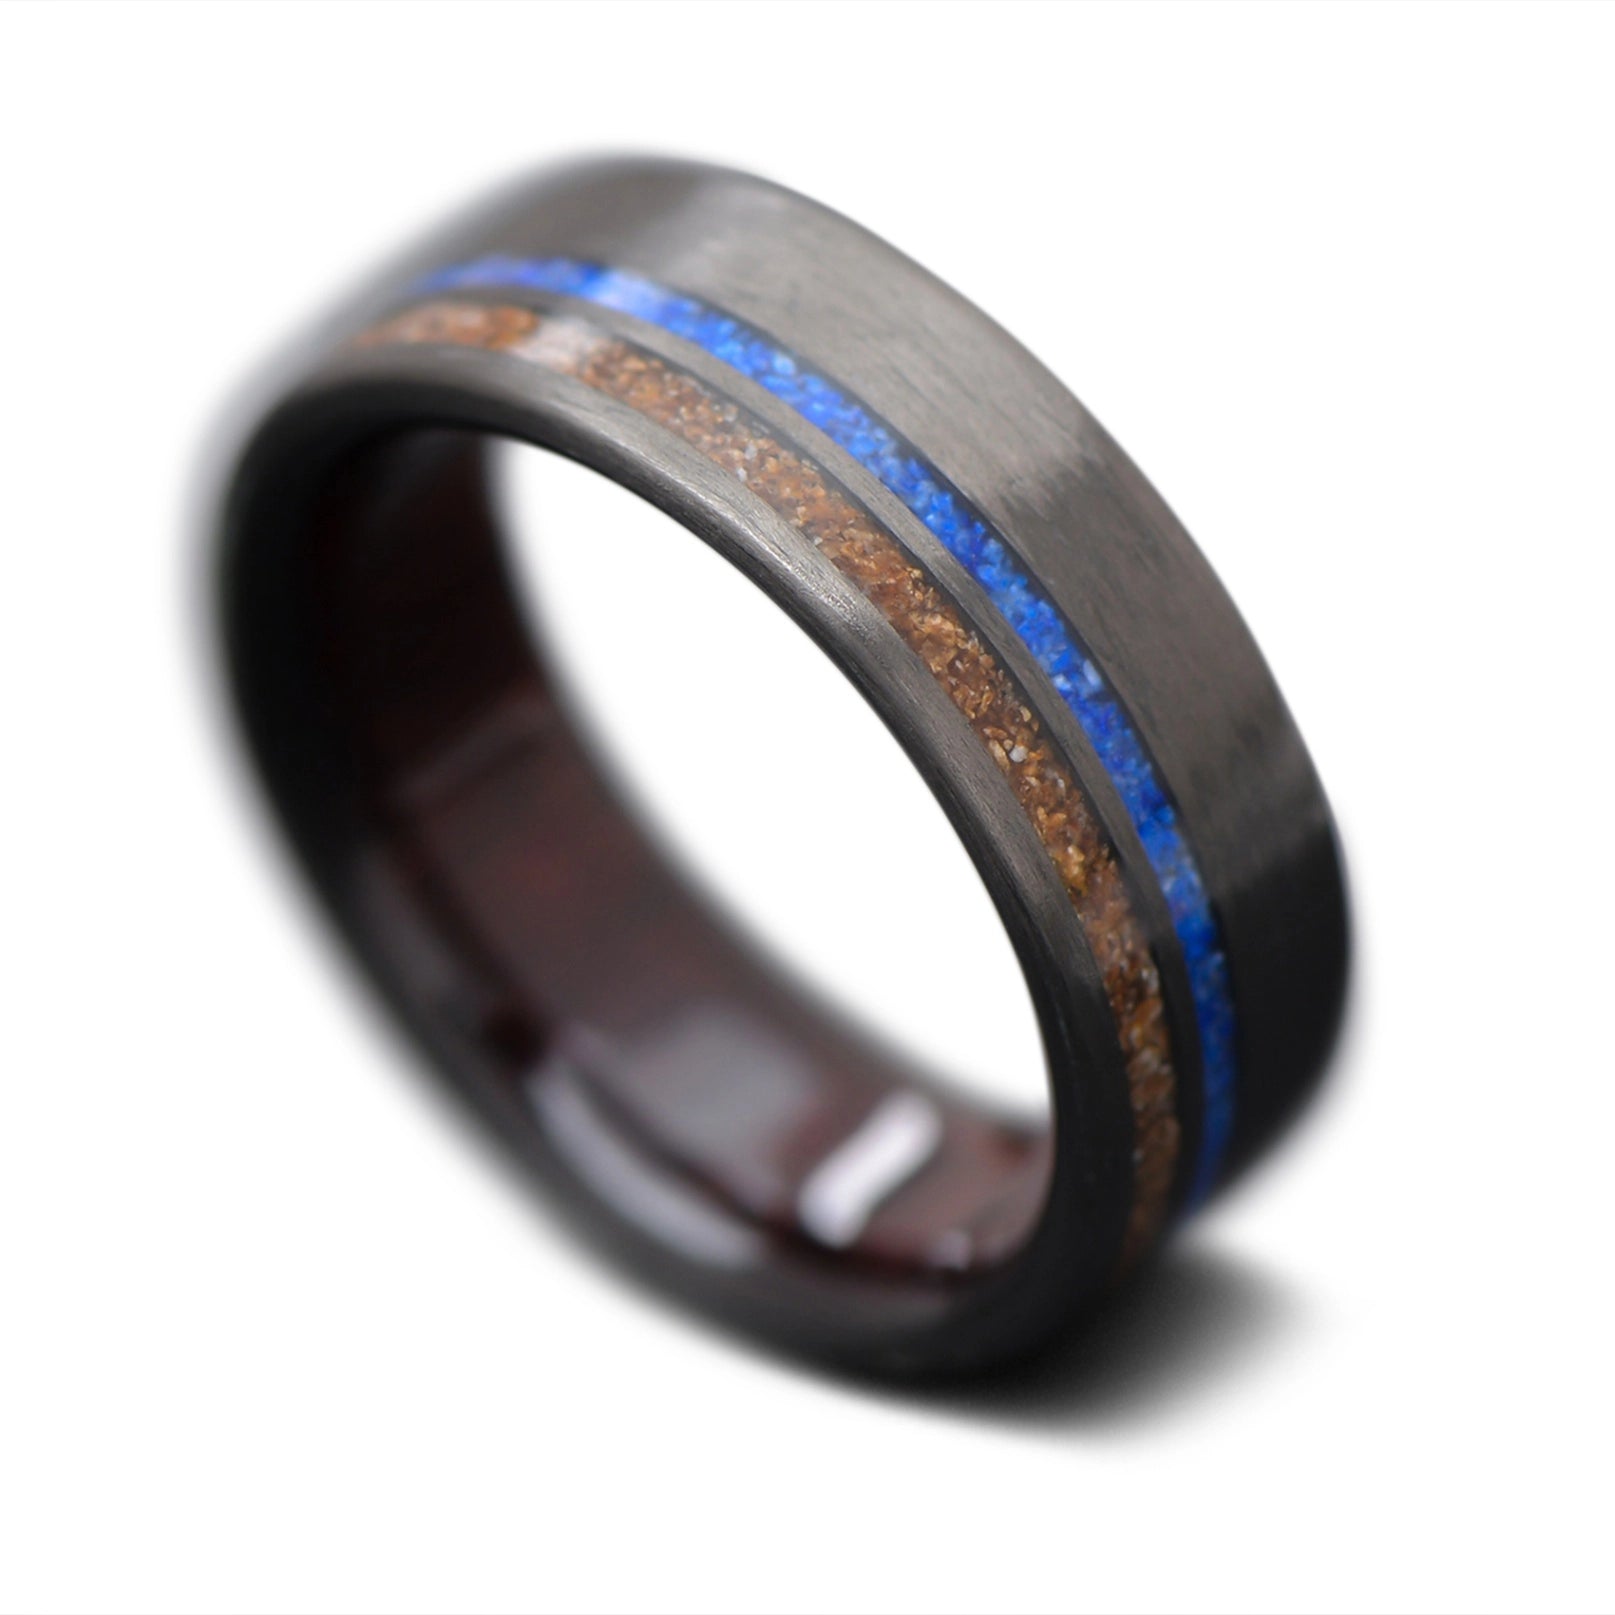 CarbonUni Core Ring with Crushed Triceratops, Lapis Lazuli inlay and Koa wood inner sleeve, 8mm - THE INNOVATOR